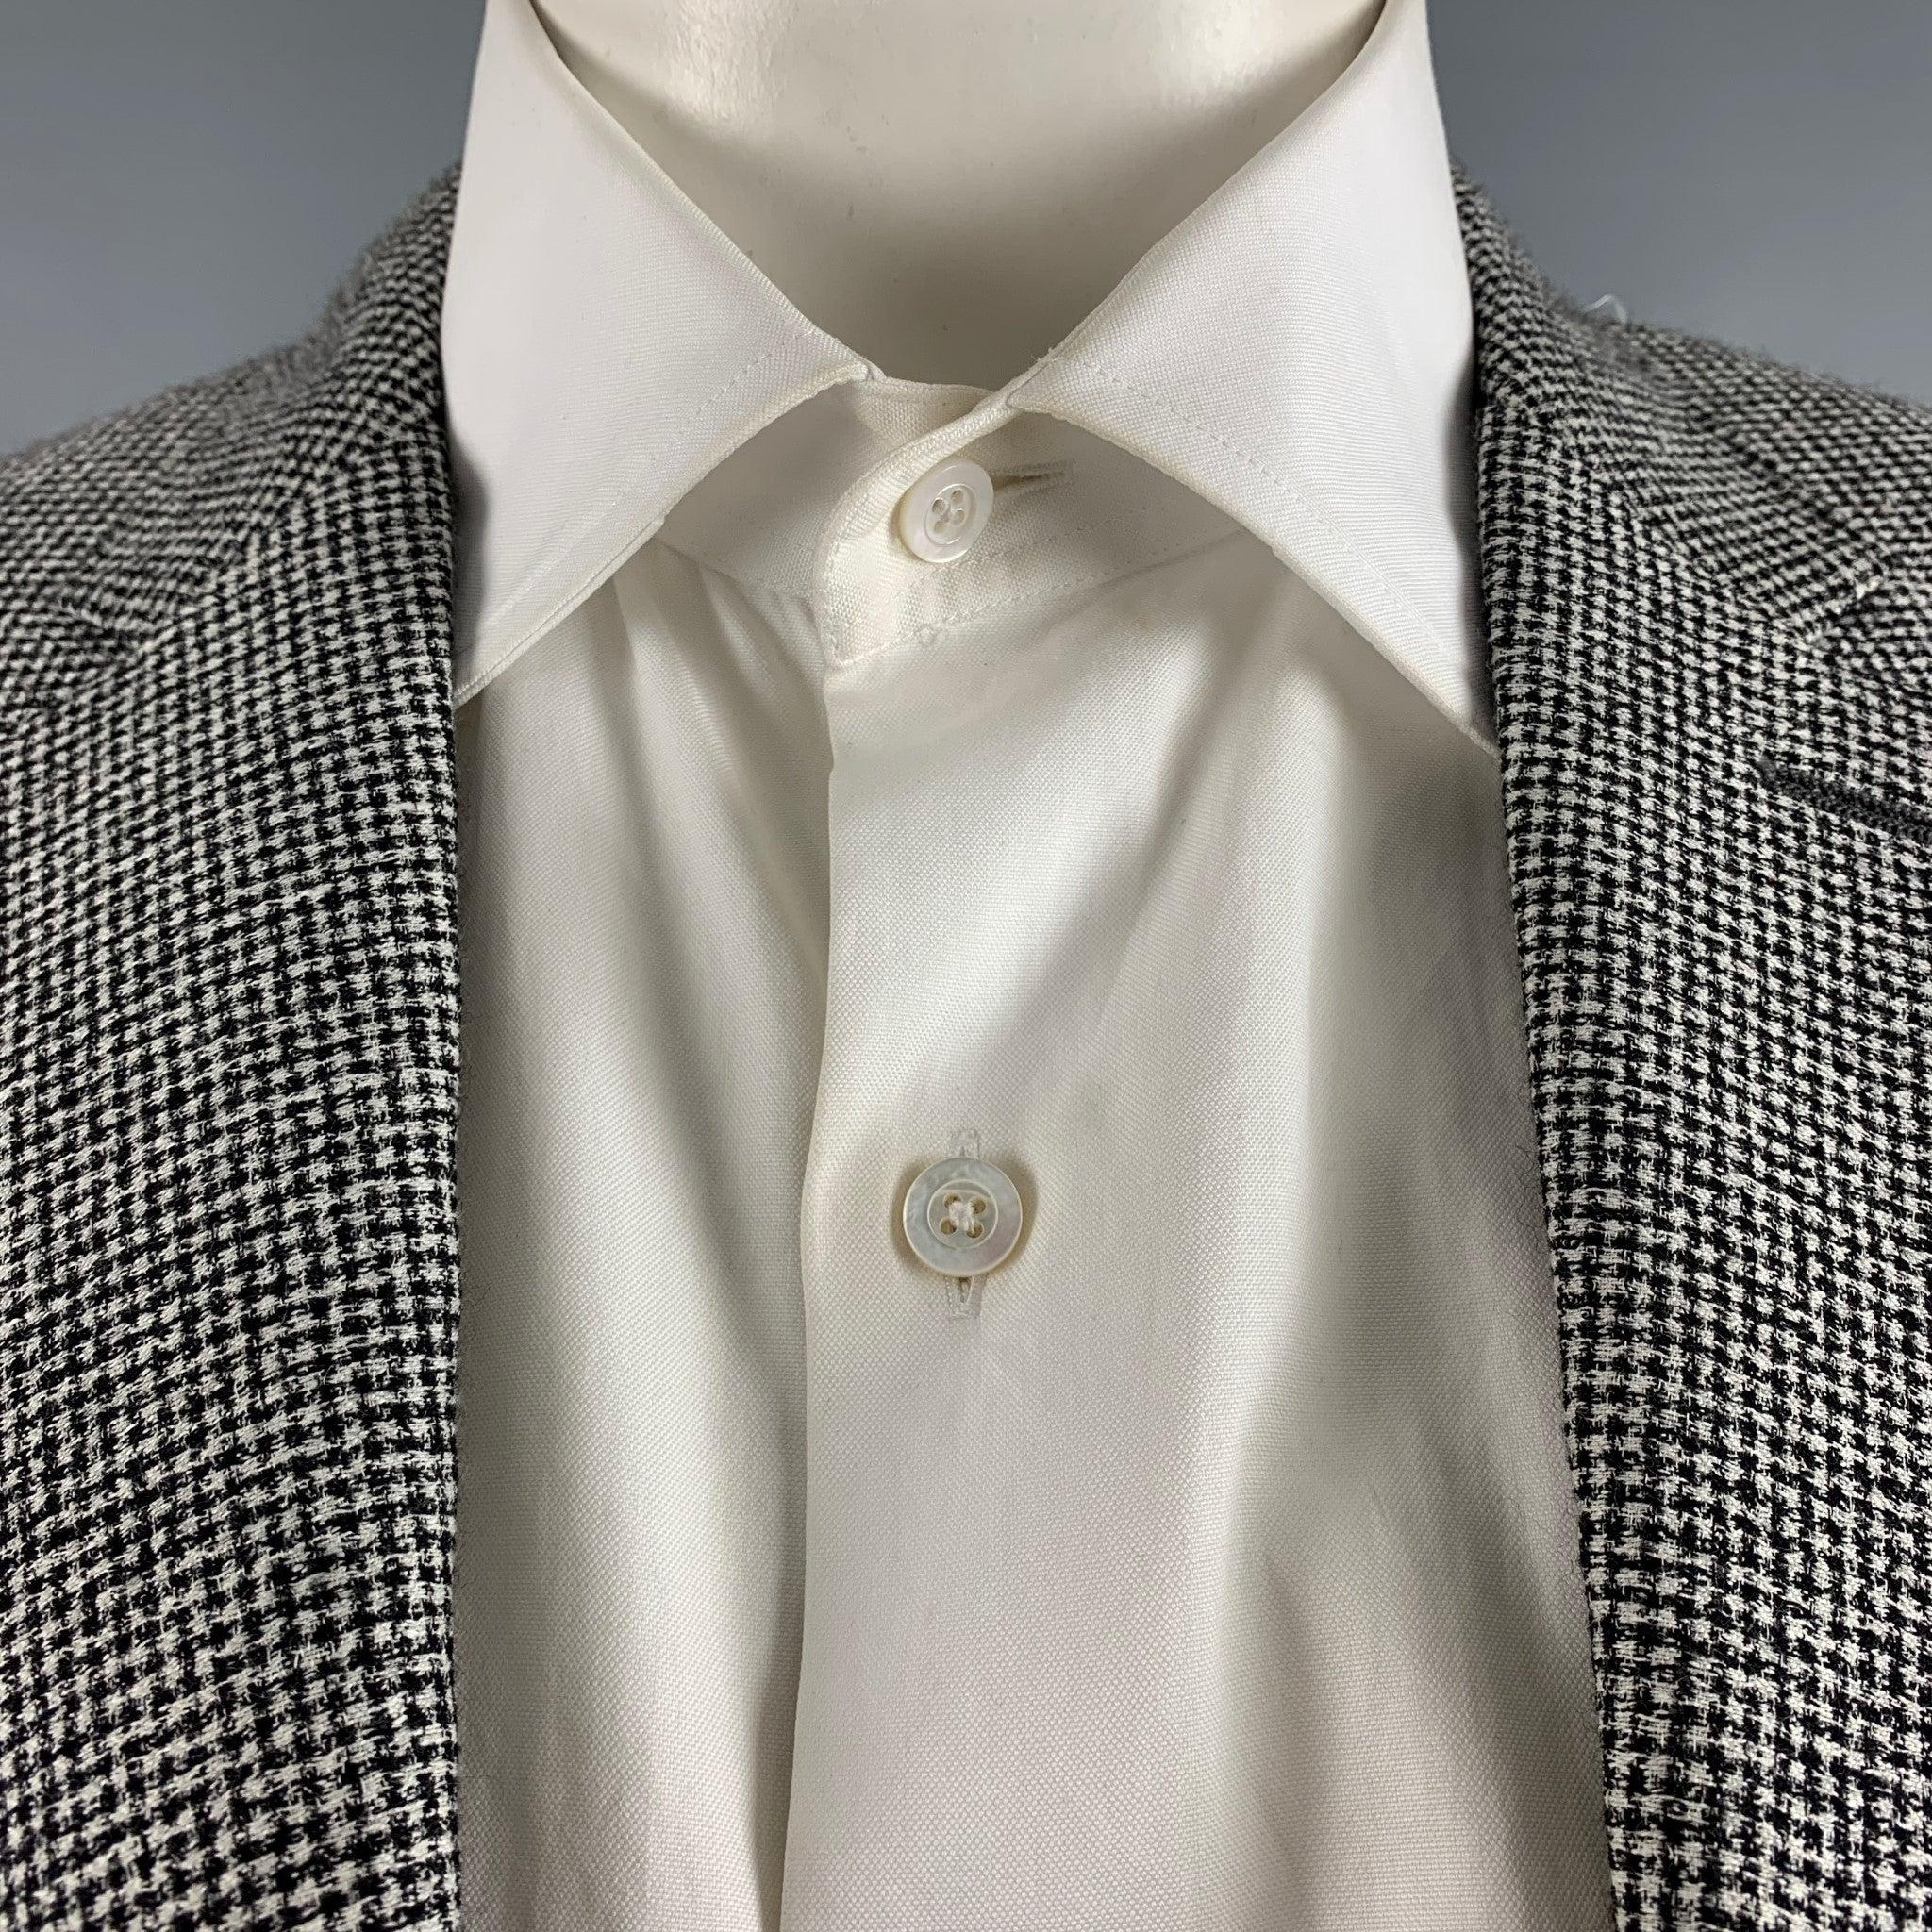 BURBERRY LONDON sport coat comes in a black and white houndstooth cotton blend woven with a no liner featuring a notch lapel, single back vent, and a double button closure. Made in Italy. Excellent Pre-Owned Condition. 

Marked:   52 R